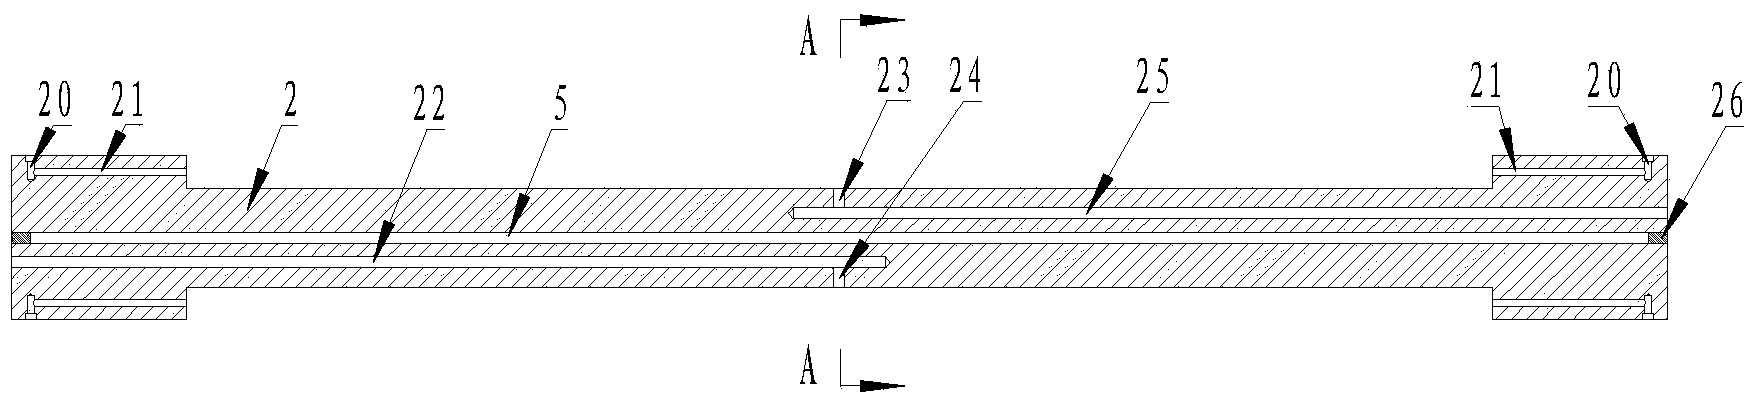 Two-dimensional constant force following hanging device